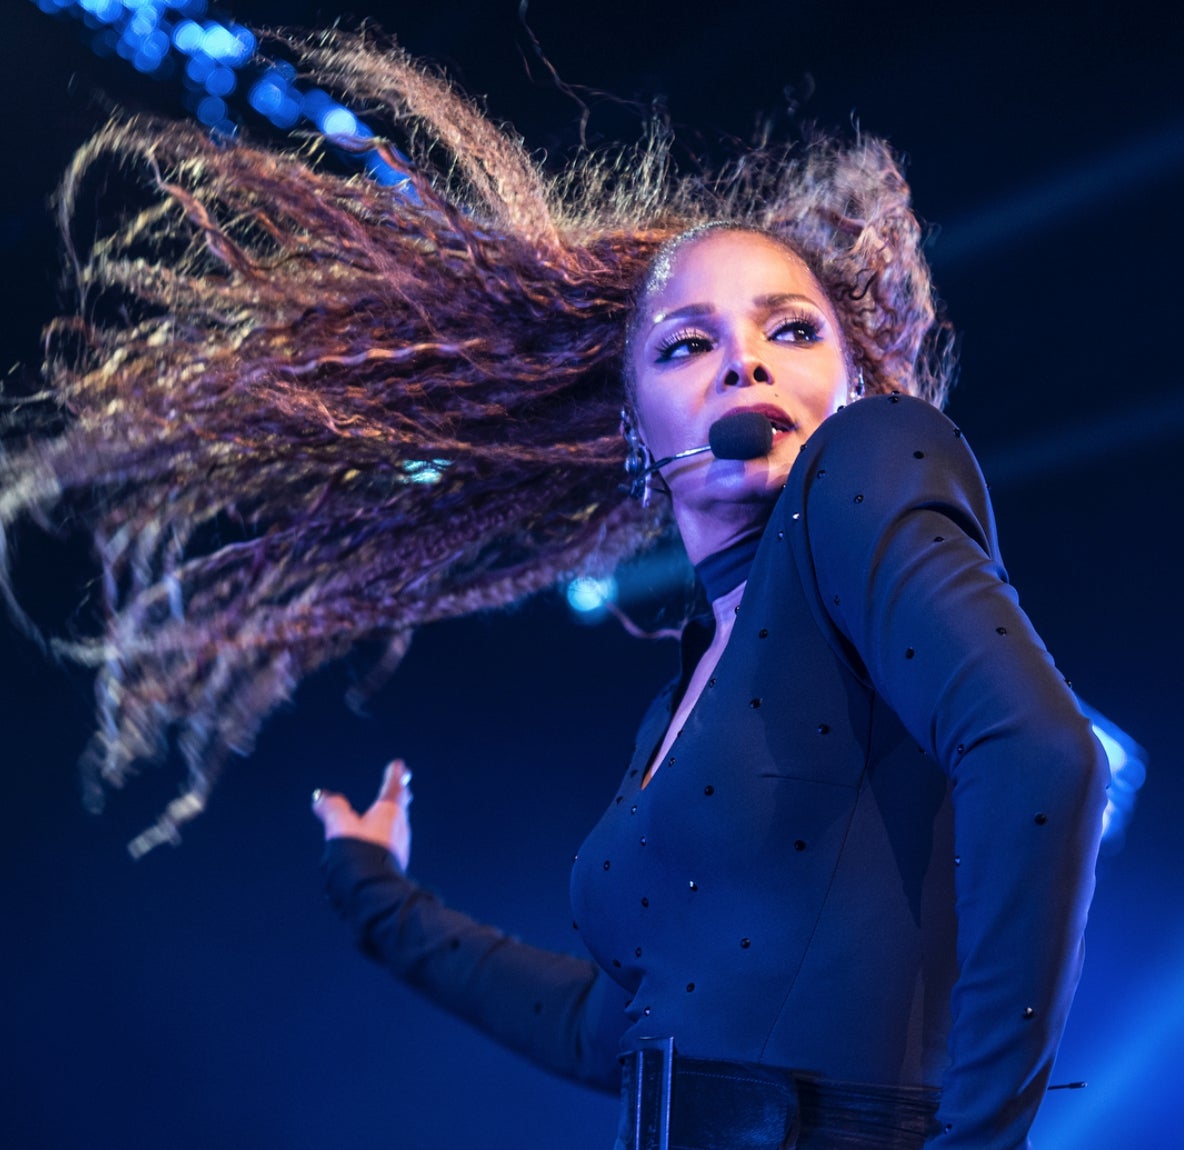 Janet Jackson Has Been Nominated For The 2019 Rock Hall Of Fame